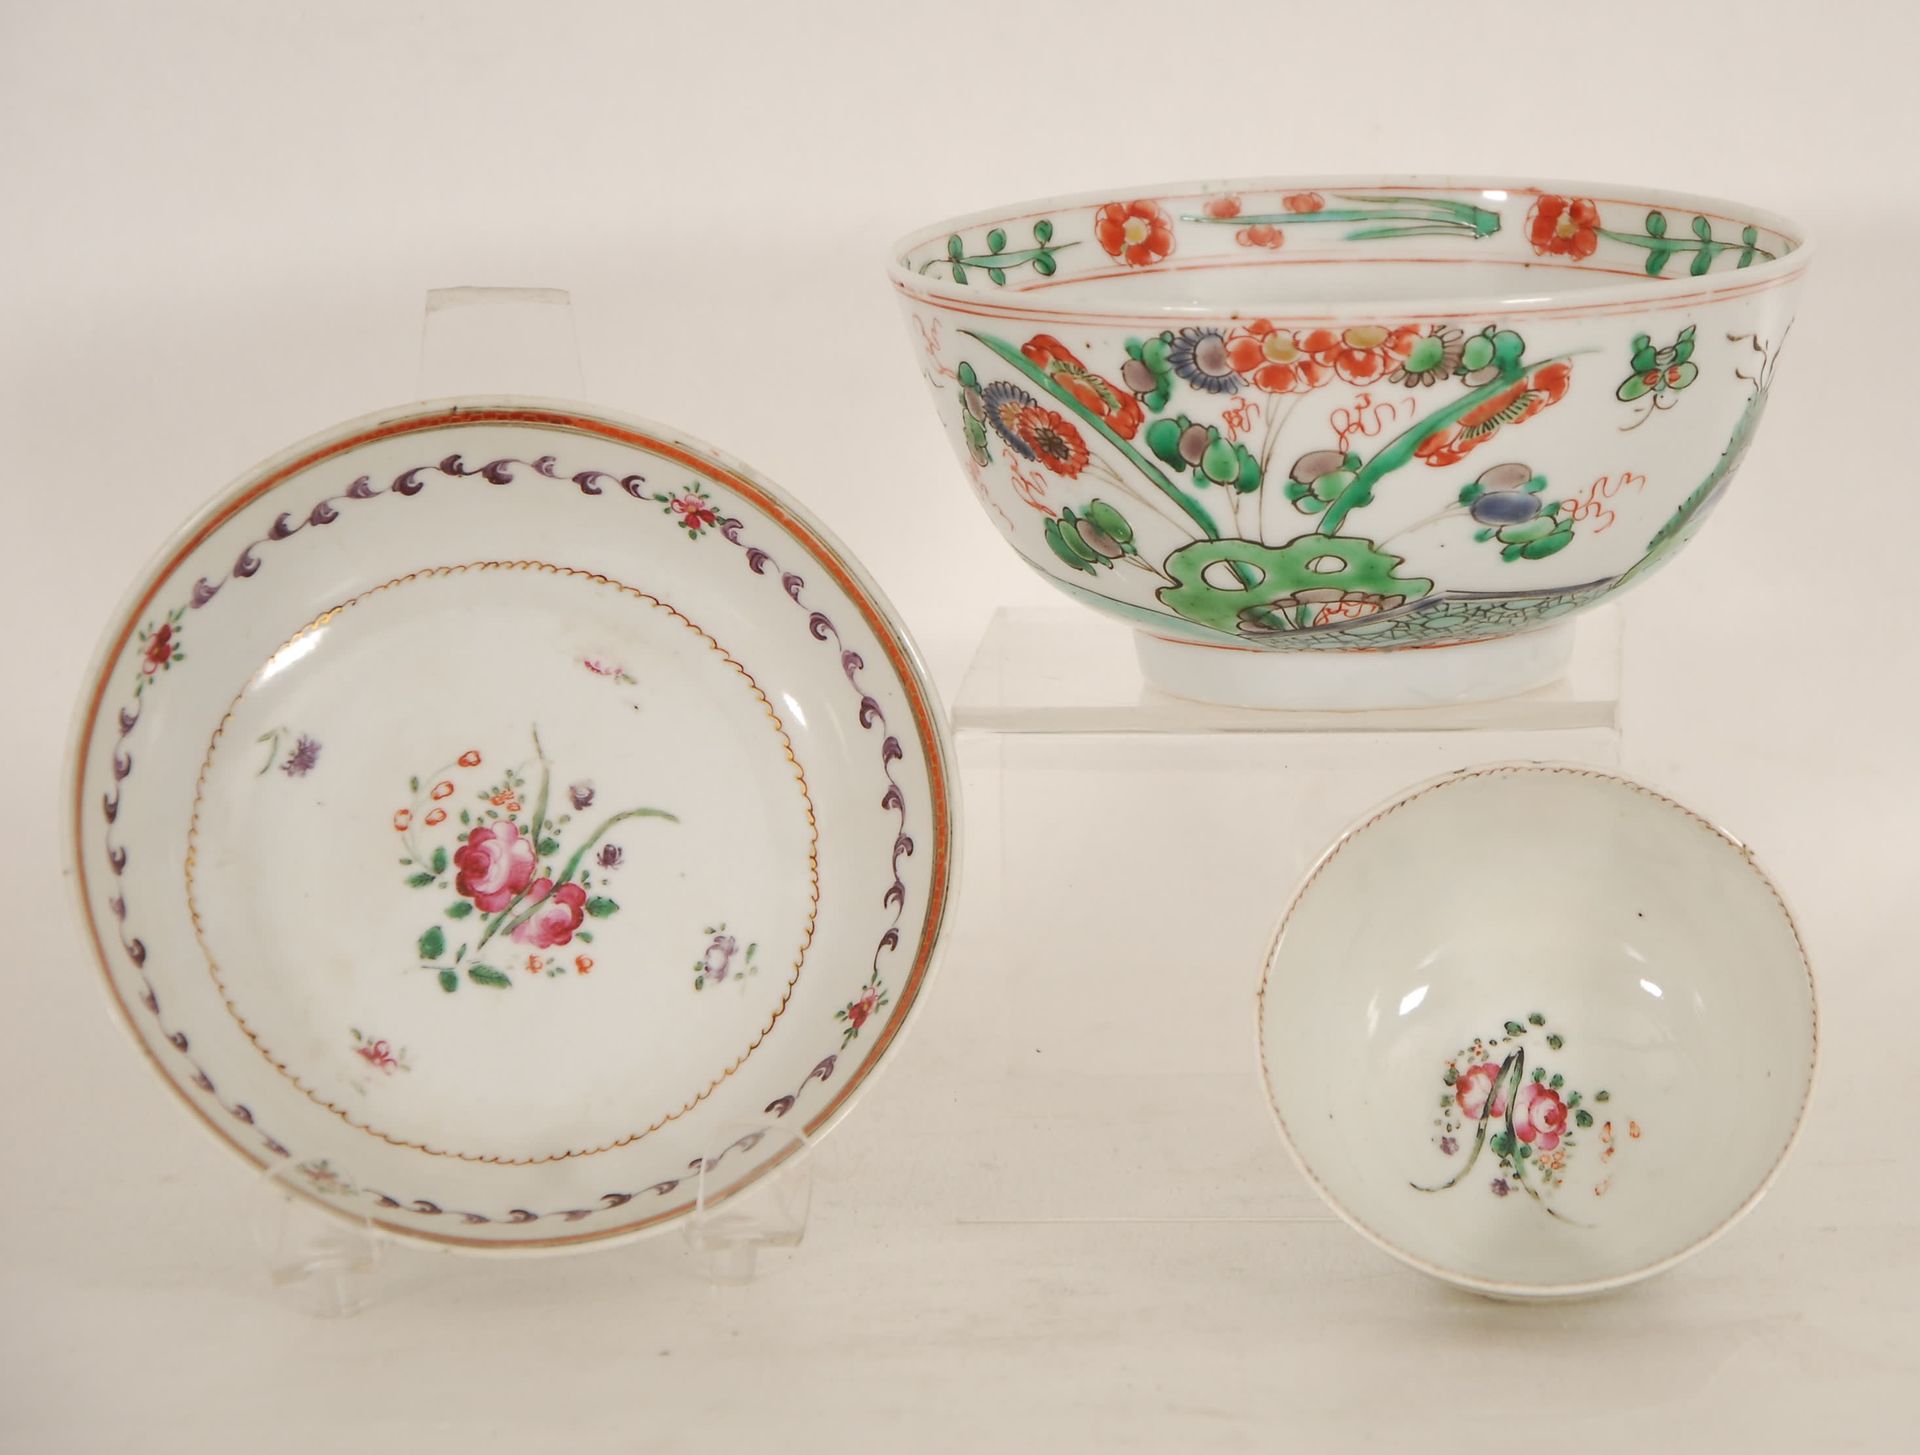 Null Lot of two bowls and a cup
China.